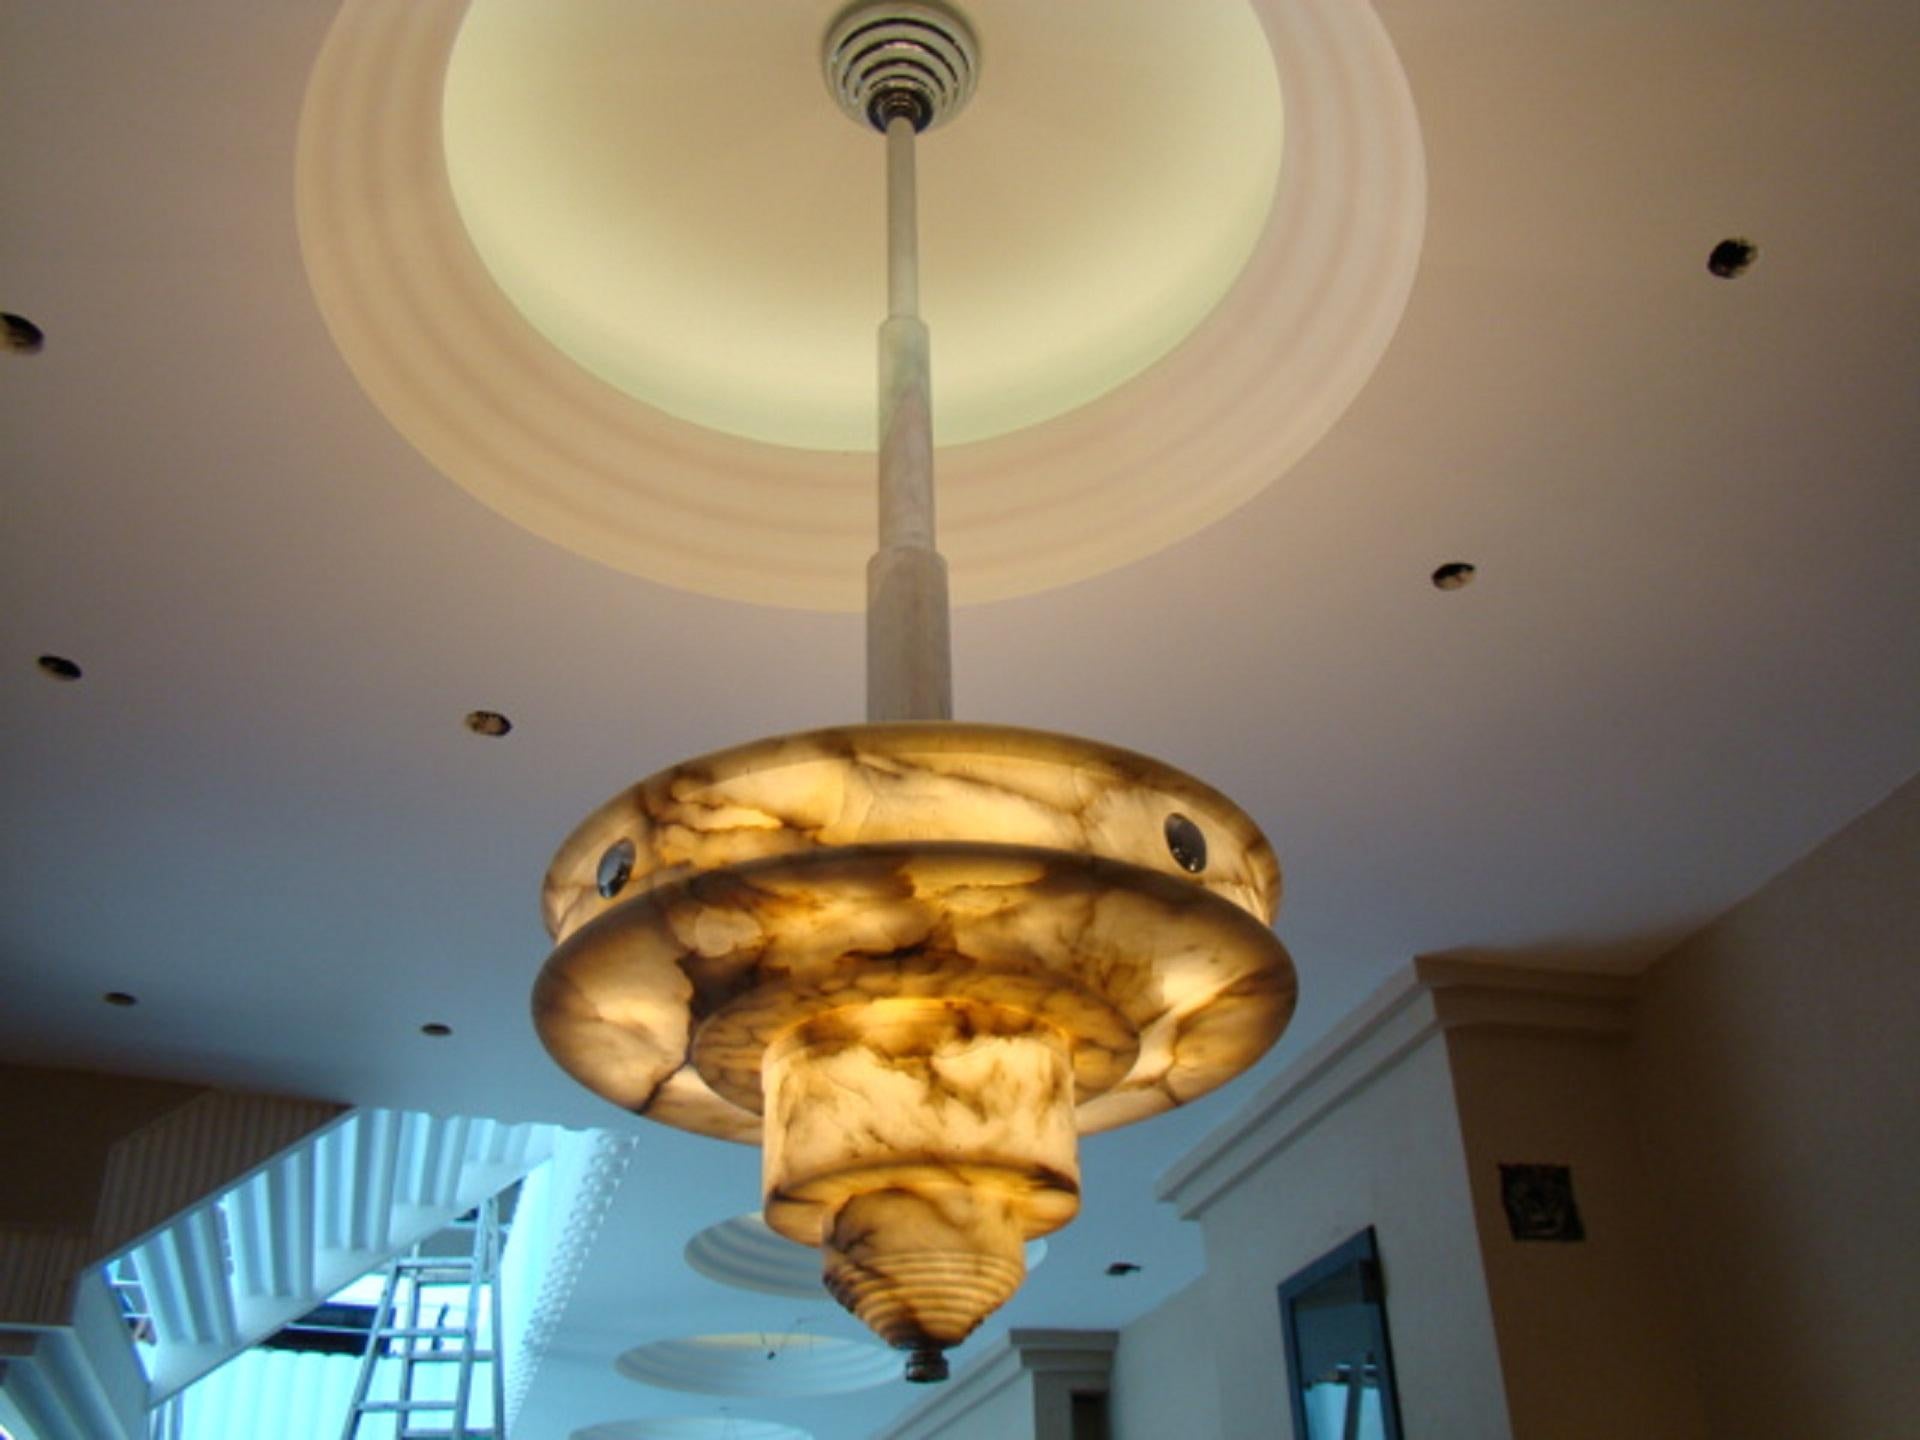 Amazing chandelier Art Deco (alabaster light)

If you have problems to the hight, We can cut the barral, at the indicated height (free of charge)
Style: Art Deco
Year: 1935
Material: alabaster and chrome
To take care of your property and the lives